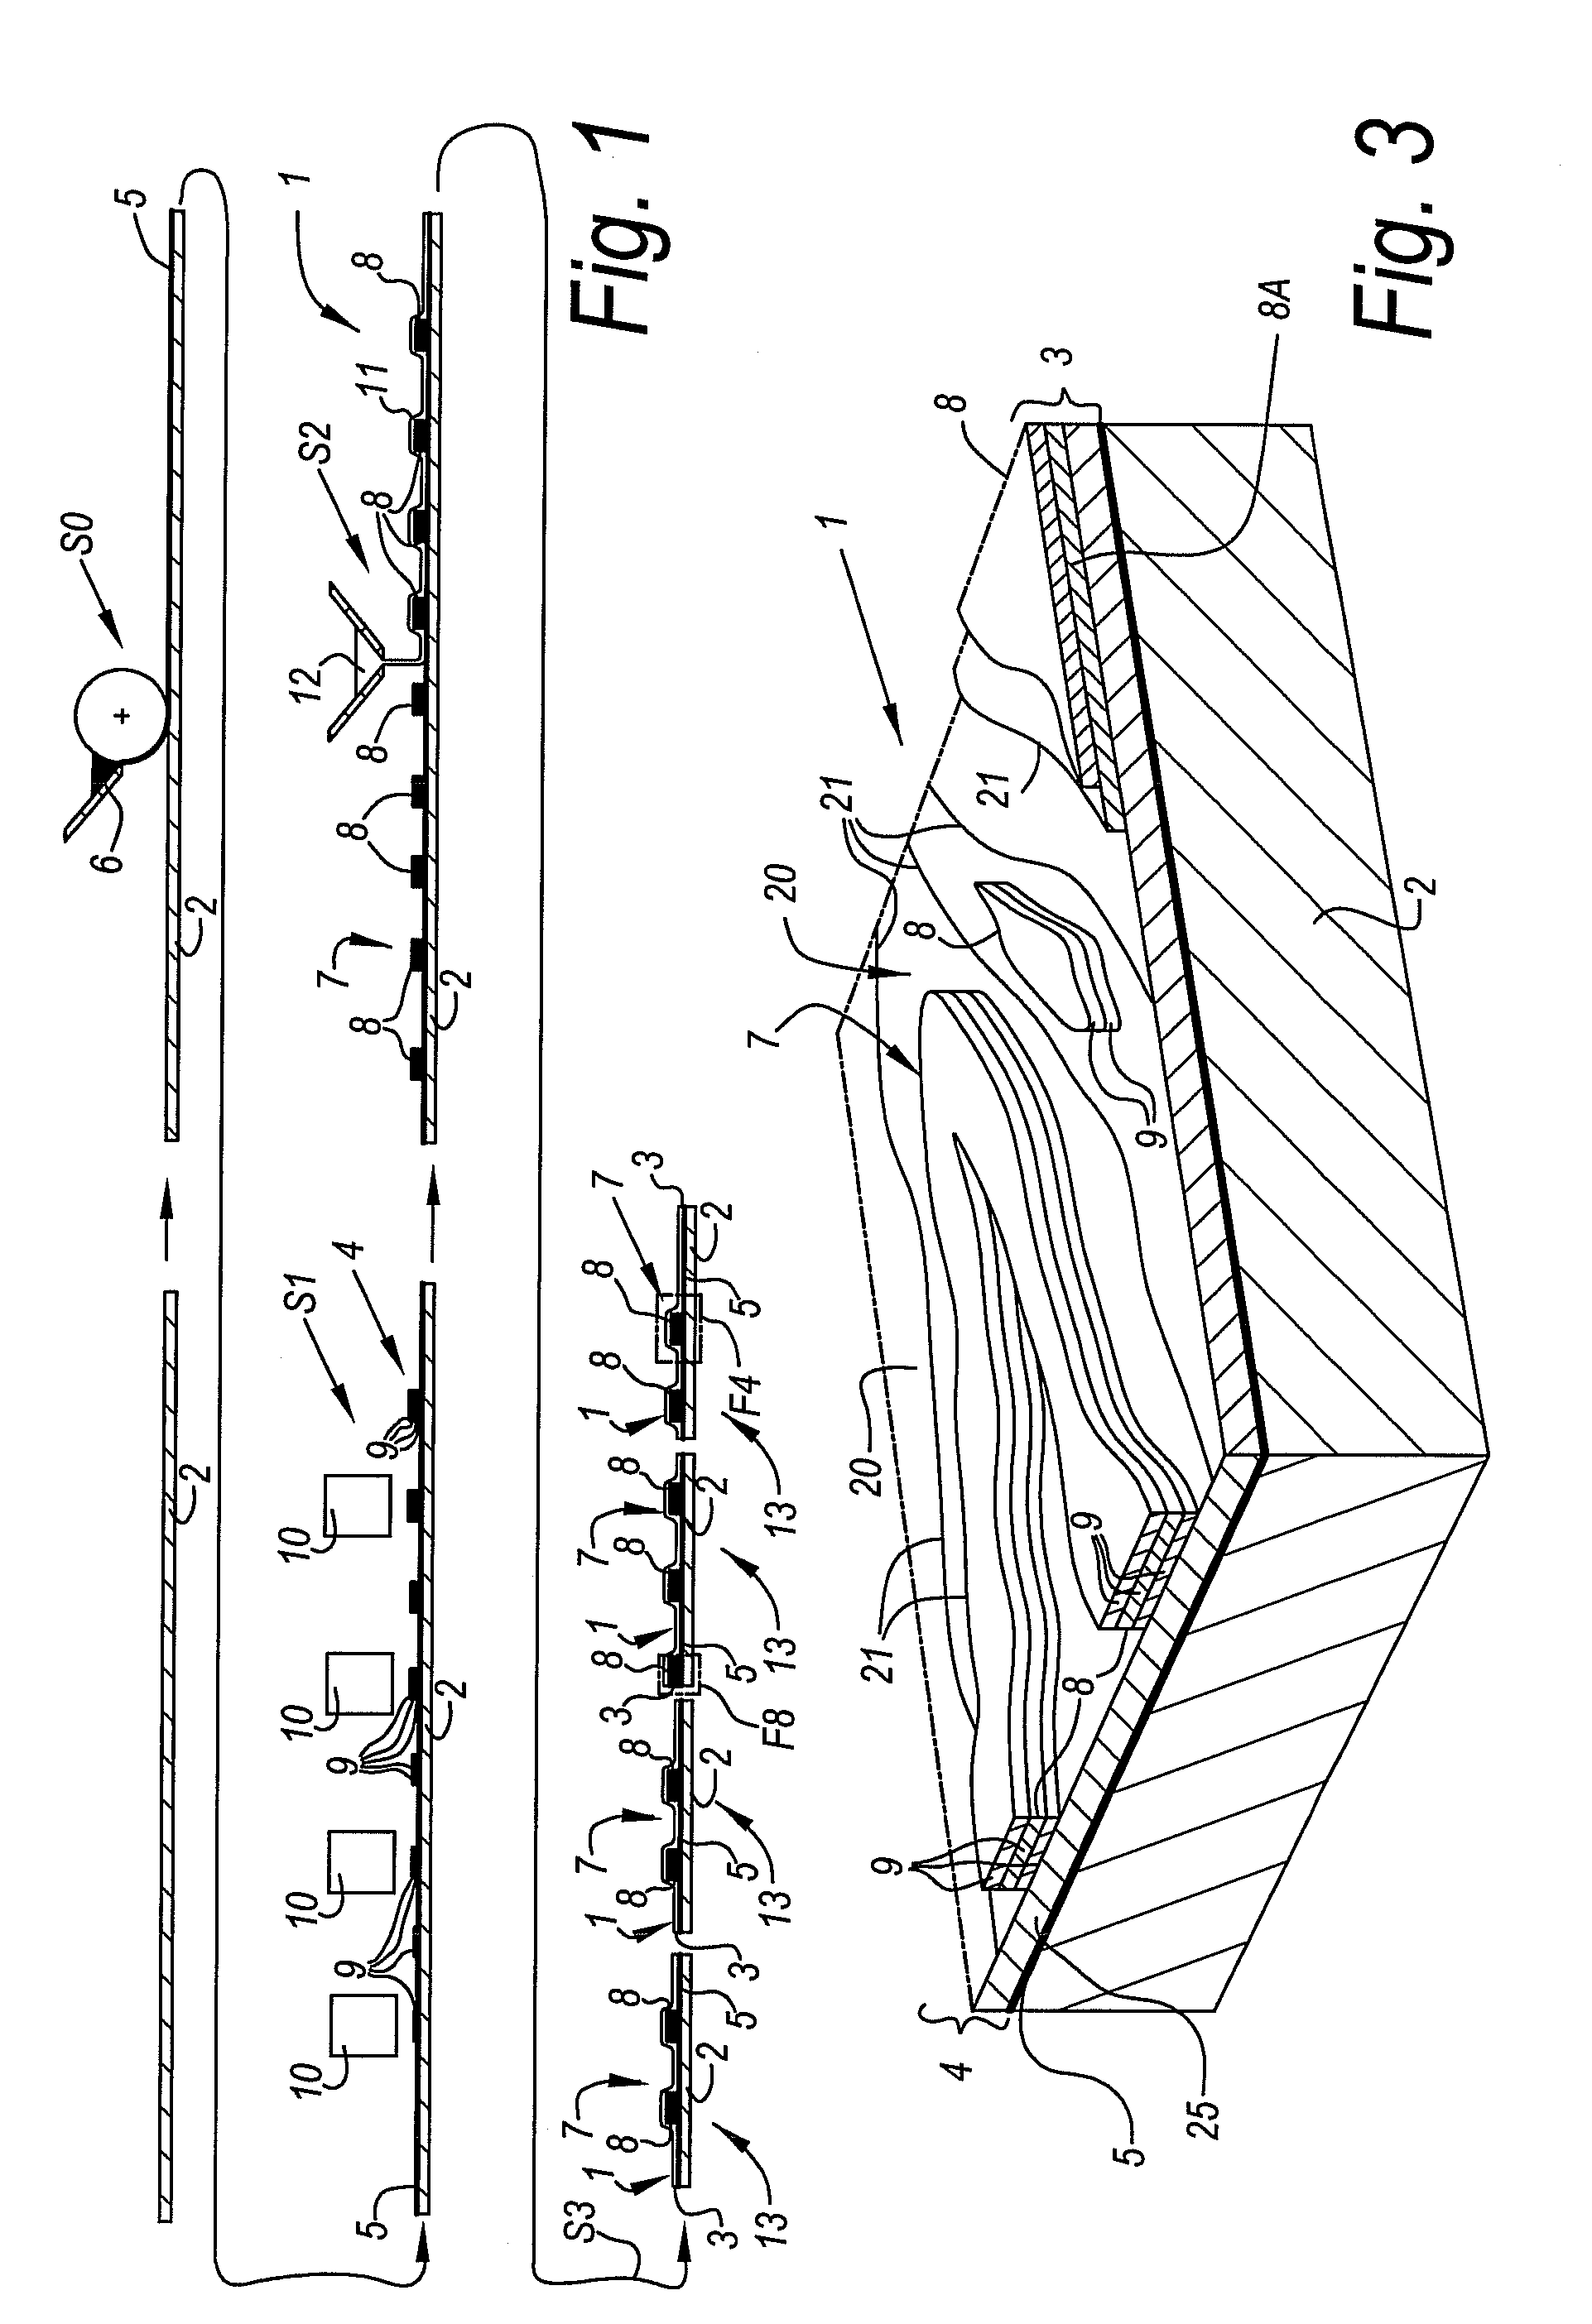 Method for manufacturing coated panels